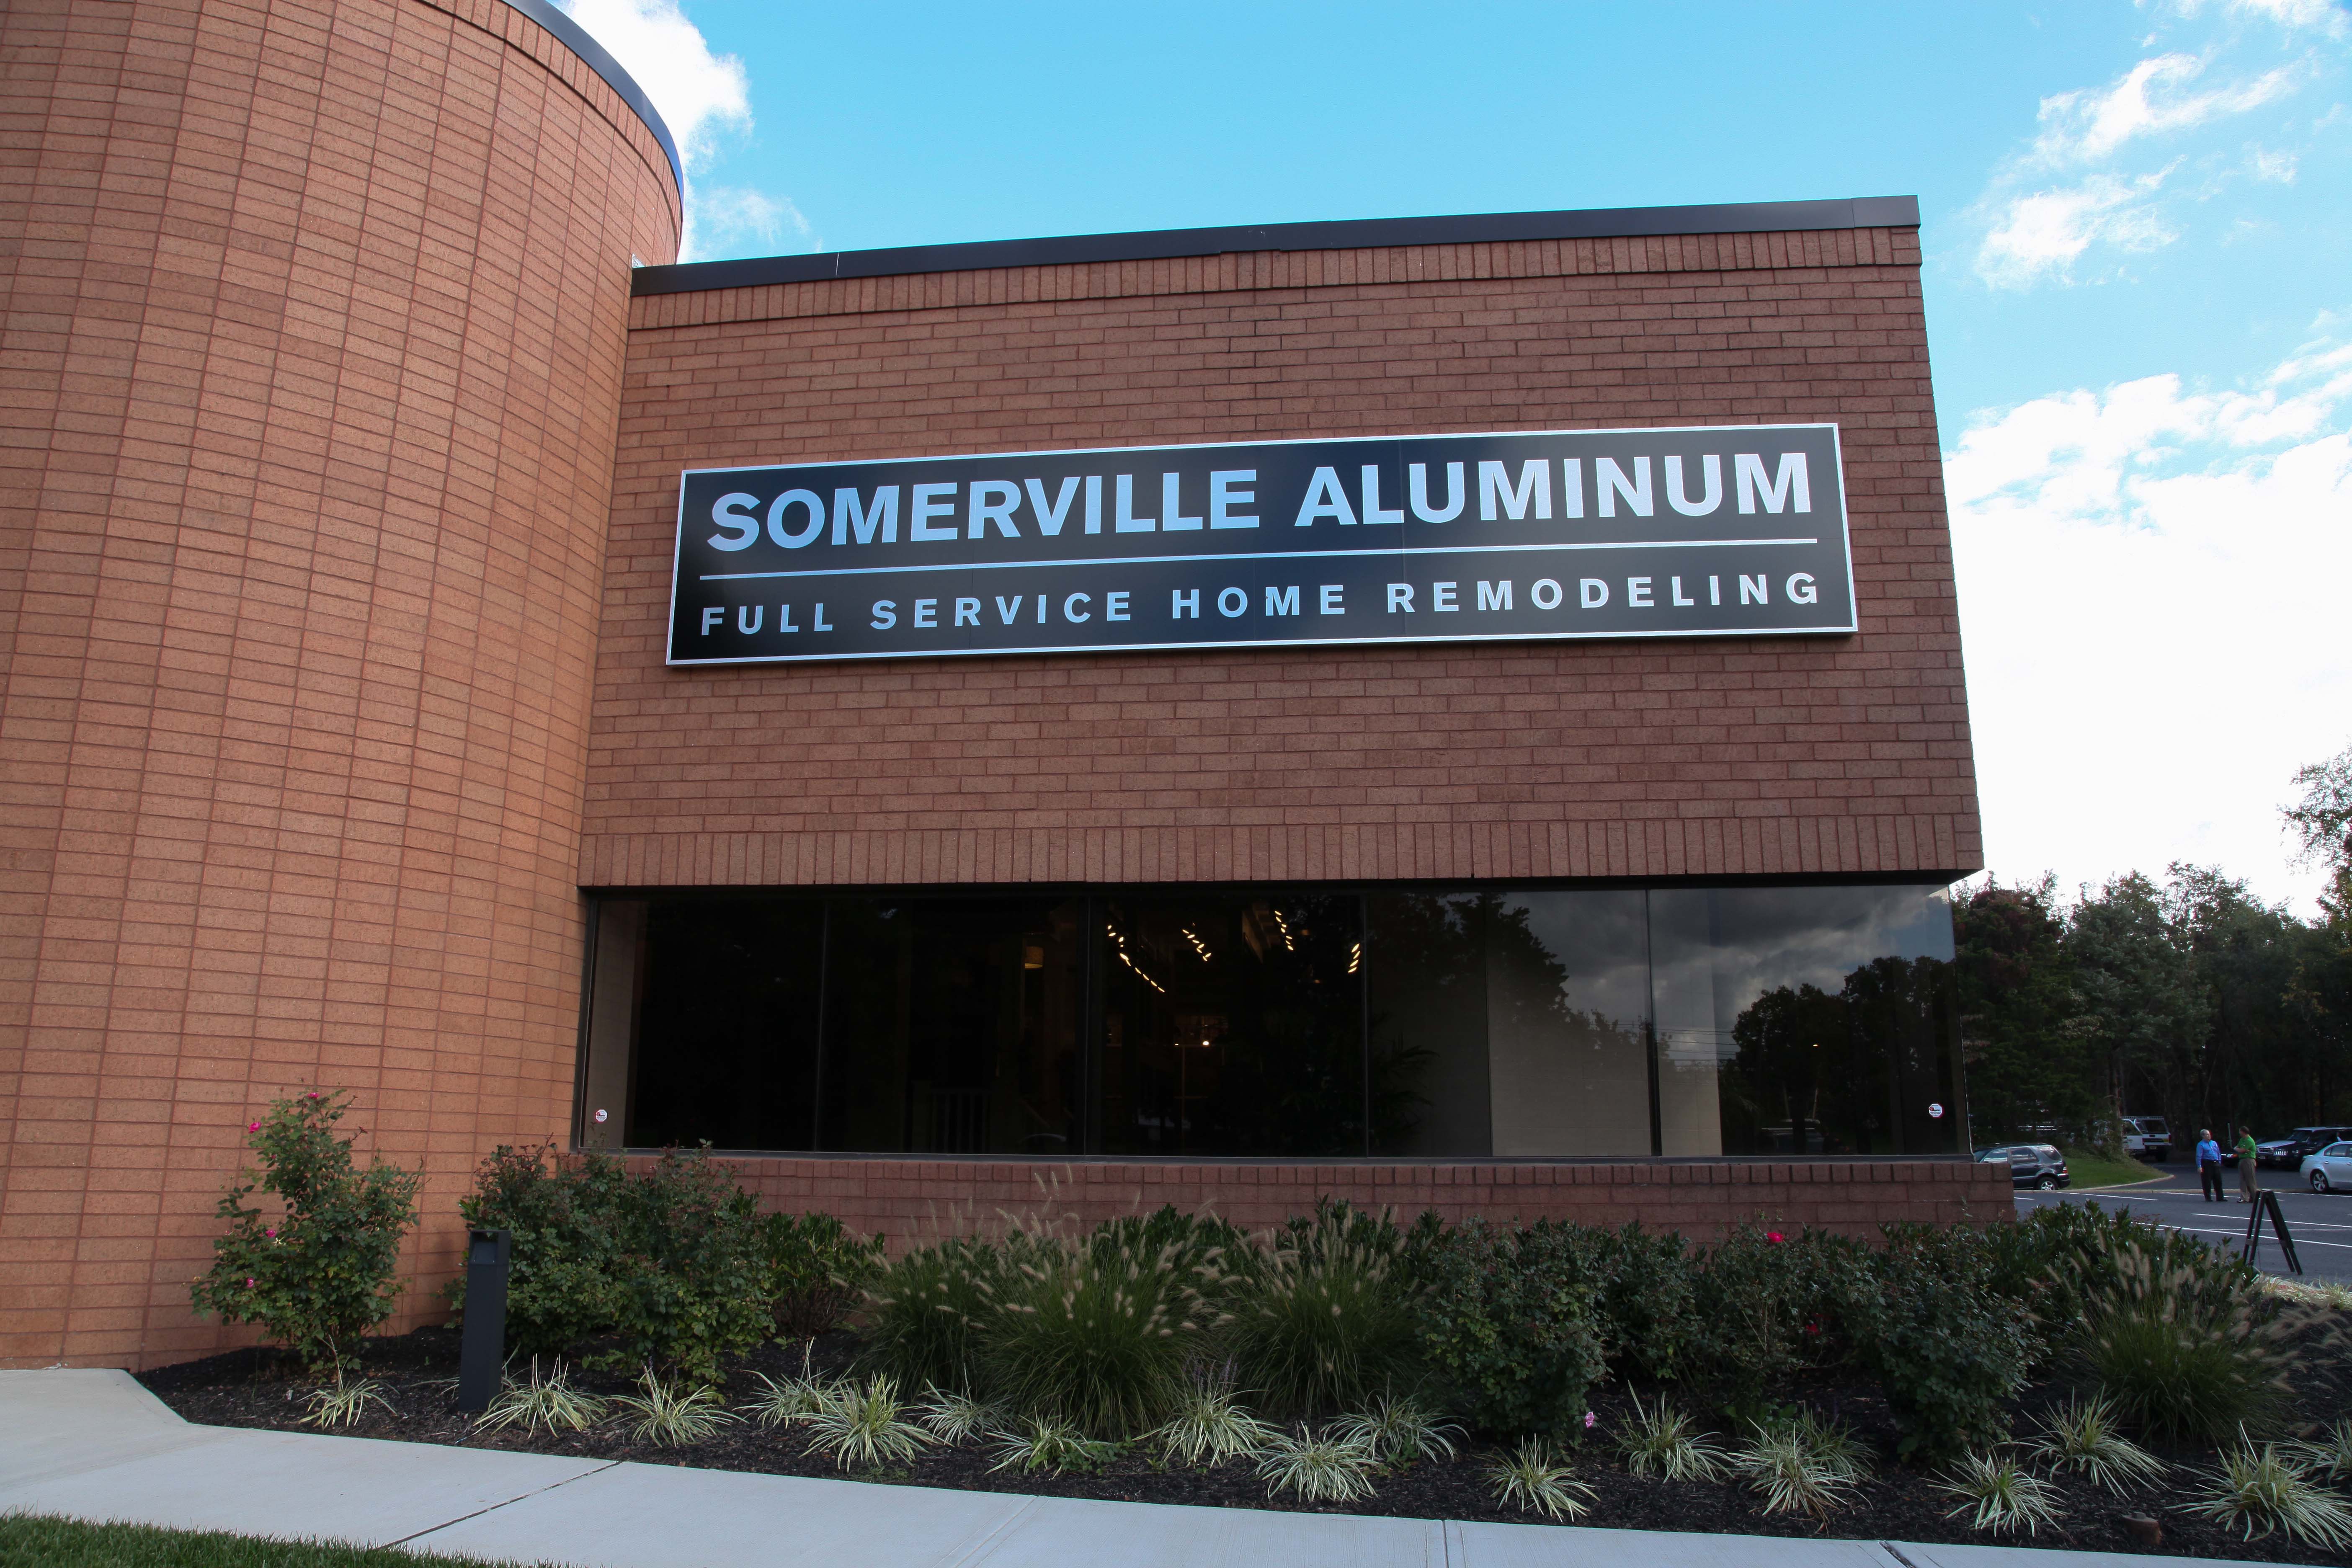 The office and showroom of Somerville Aluminum sits on a 6-acre, park-like campus in Branchburg, NJ